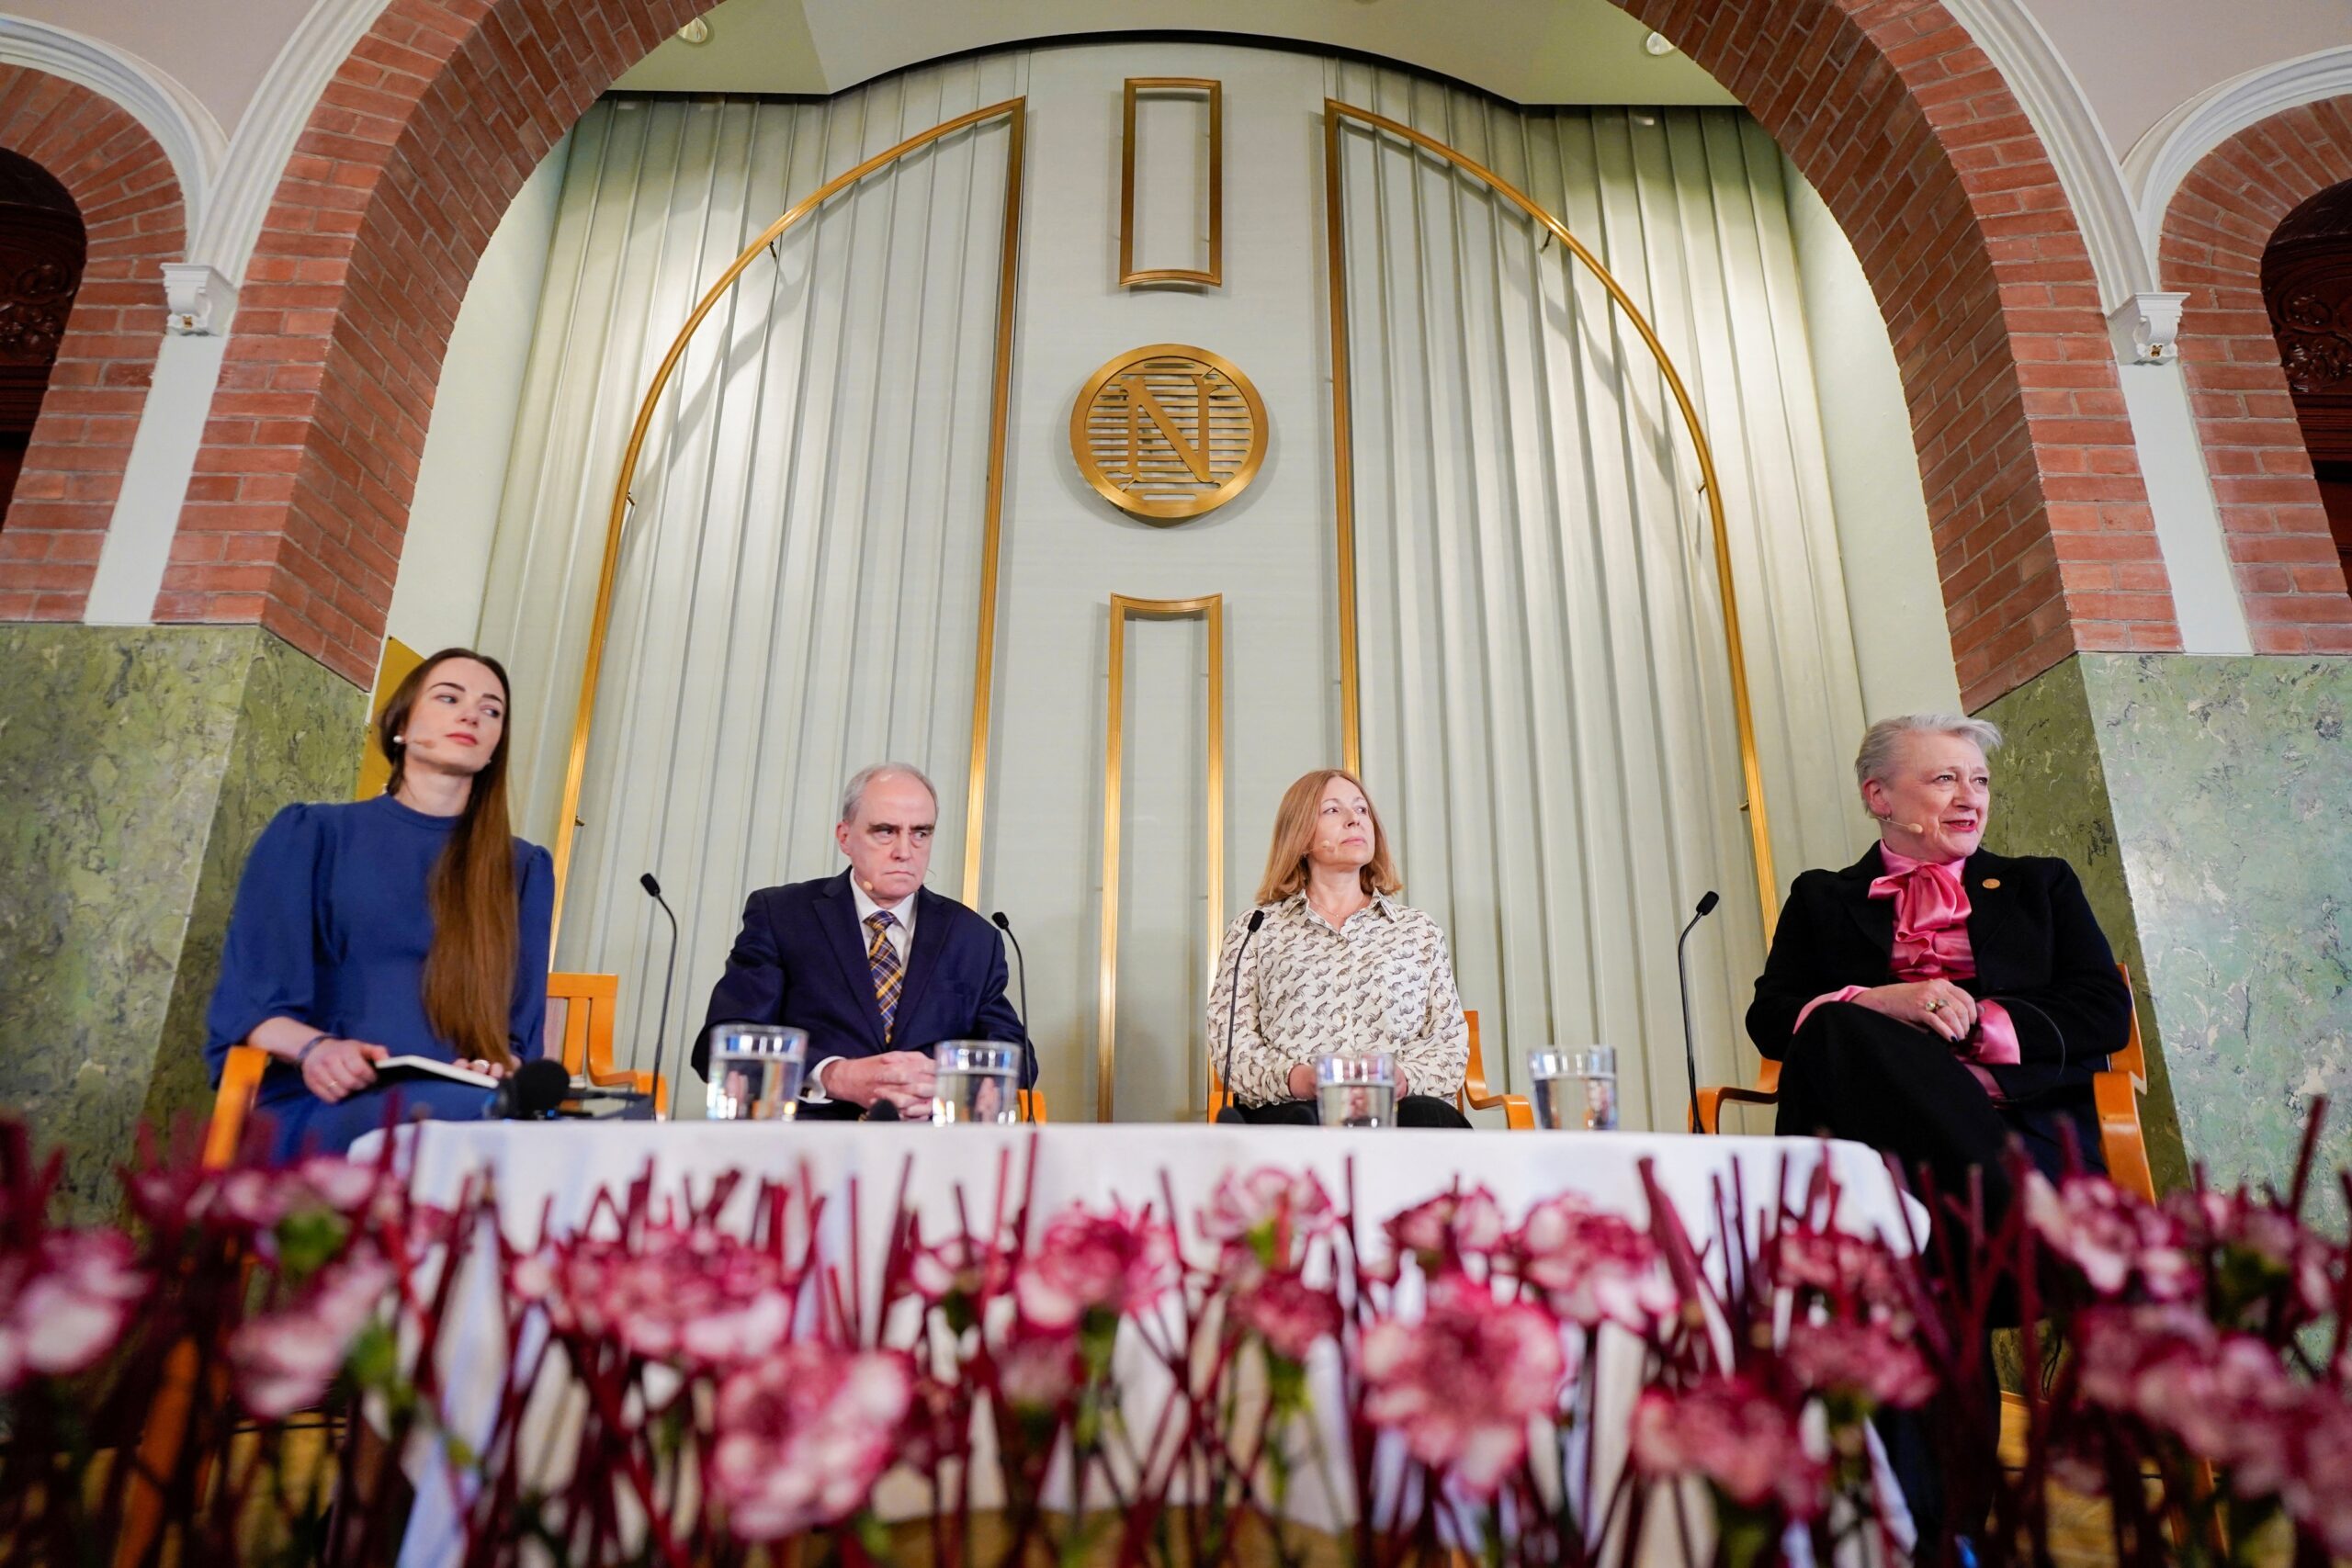 Nobel awards to take place in Stockholm with full glitz and glamor